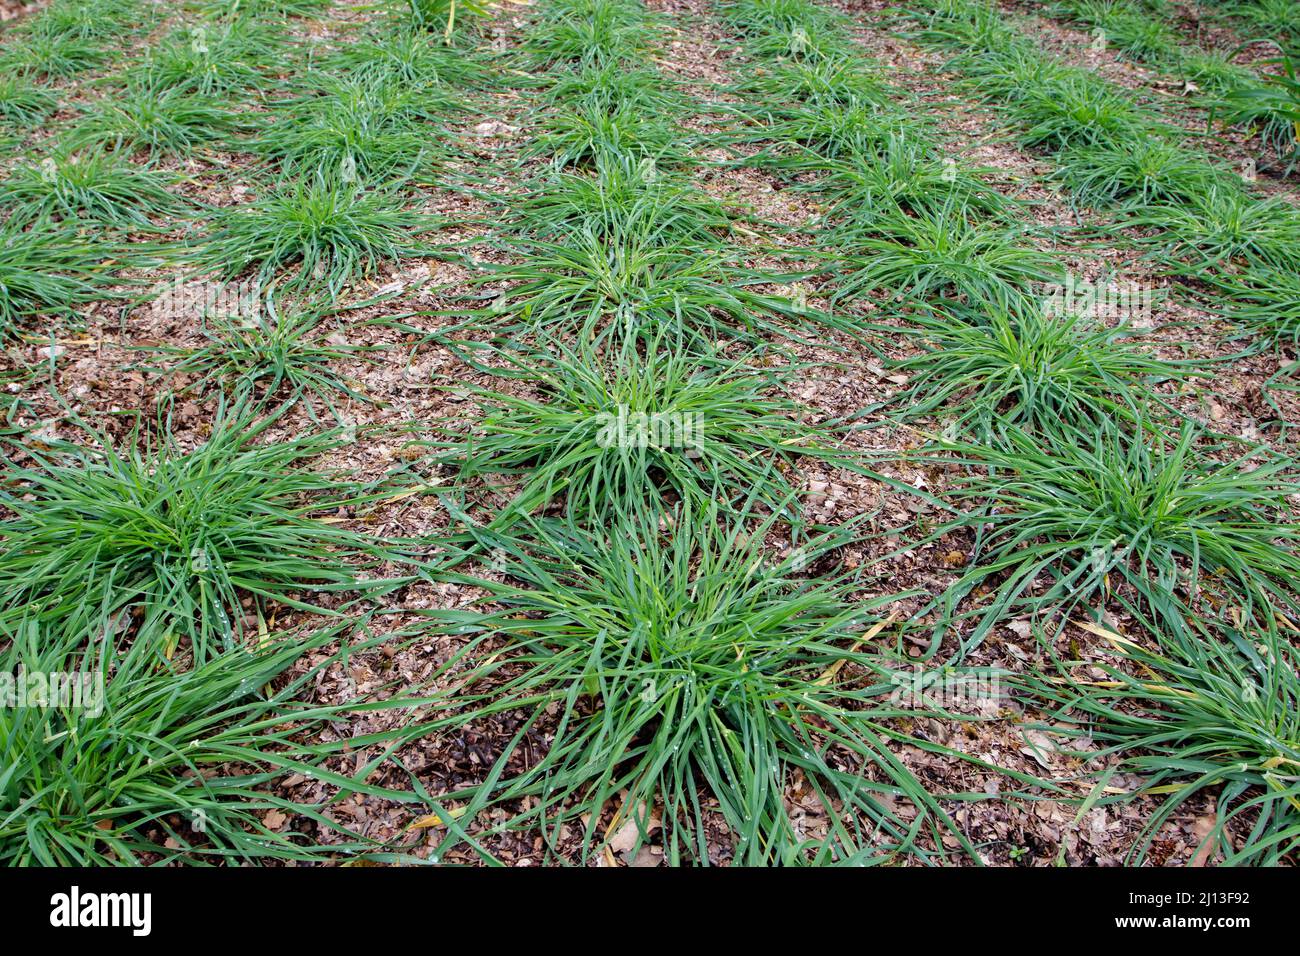 Cultivated сereal grain plants in the tillering stage. Stock Photo